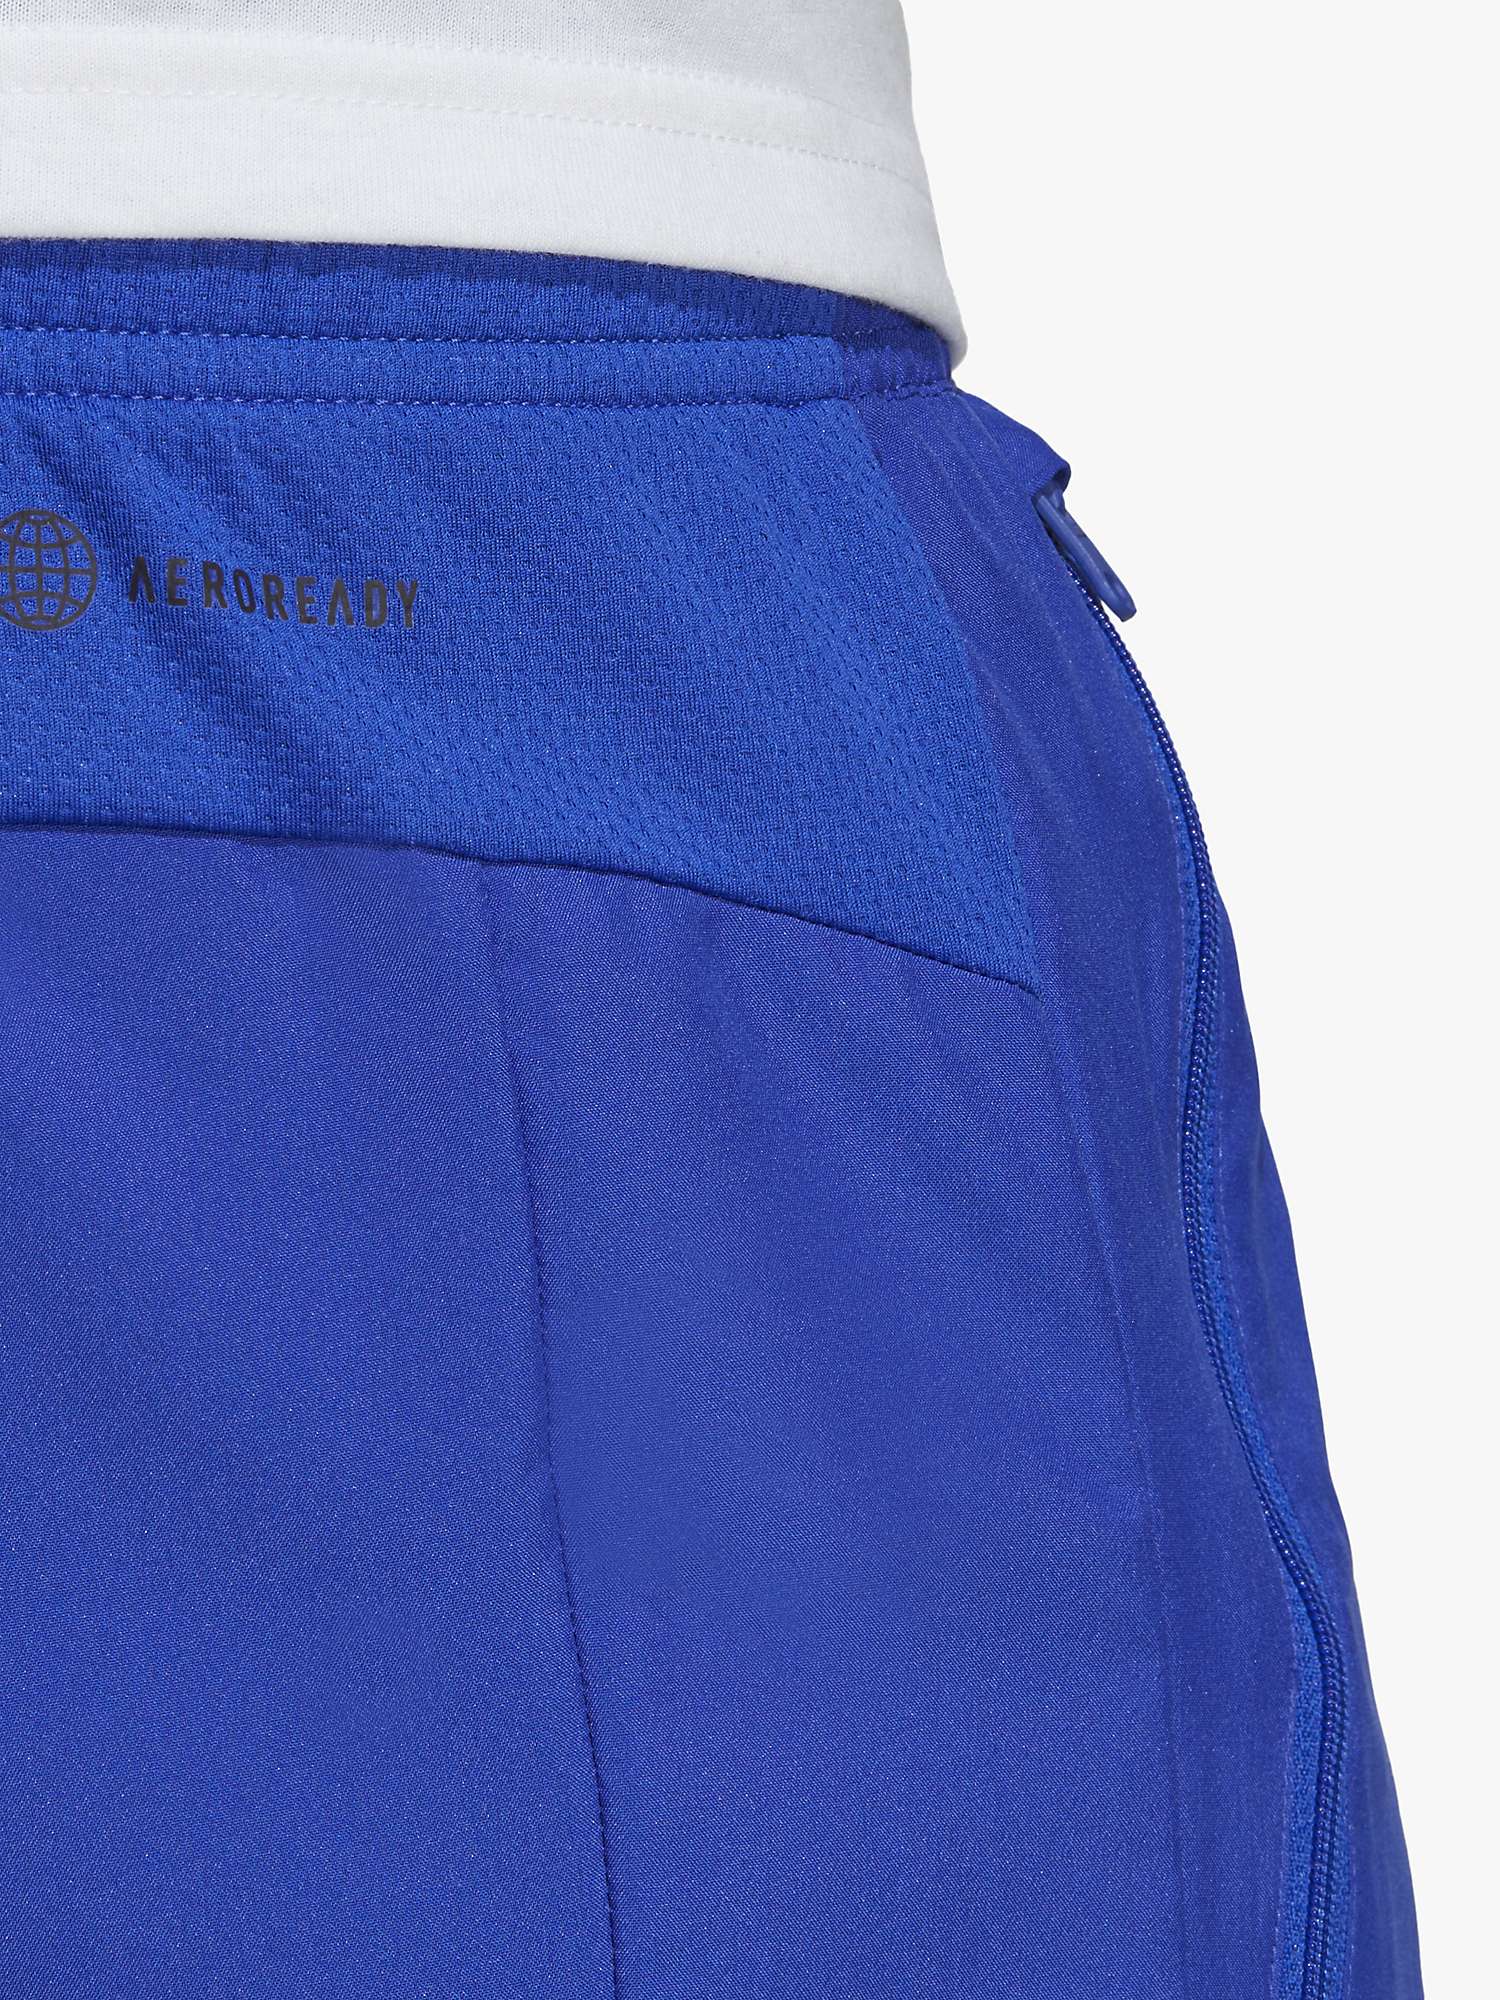 adidas Train Essentials Woven Recycled Gym Shorts, Lucid Blue/Black at ...